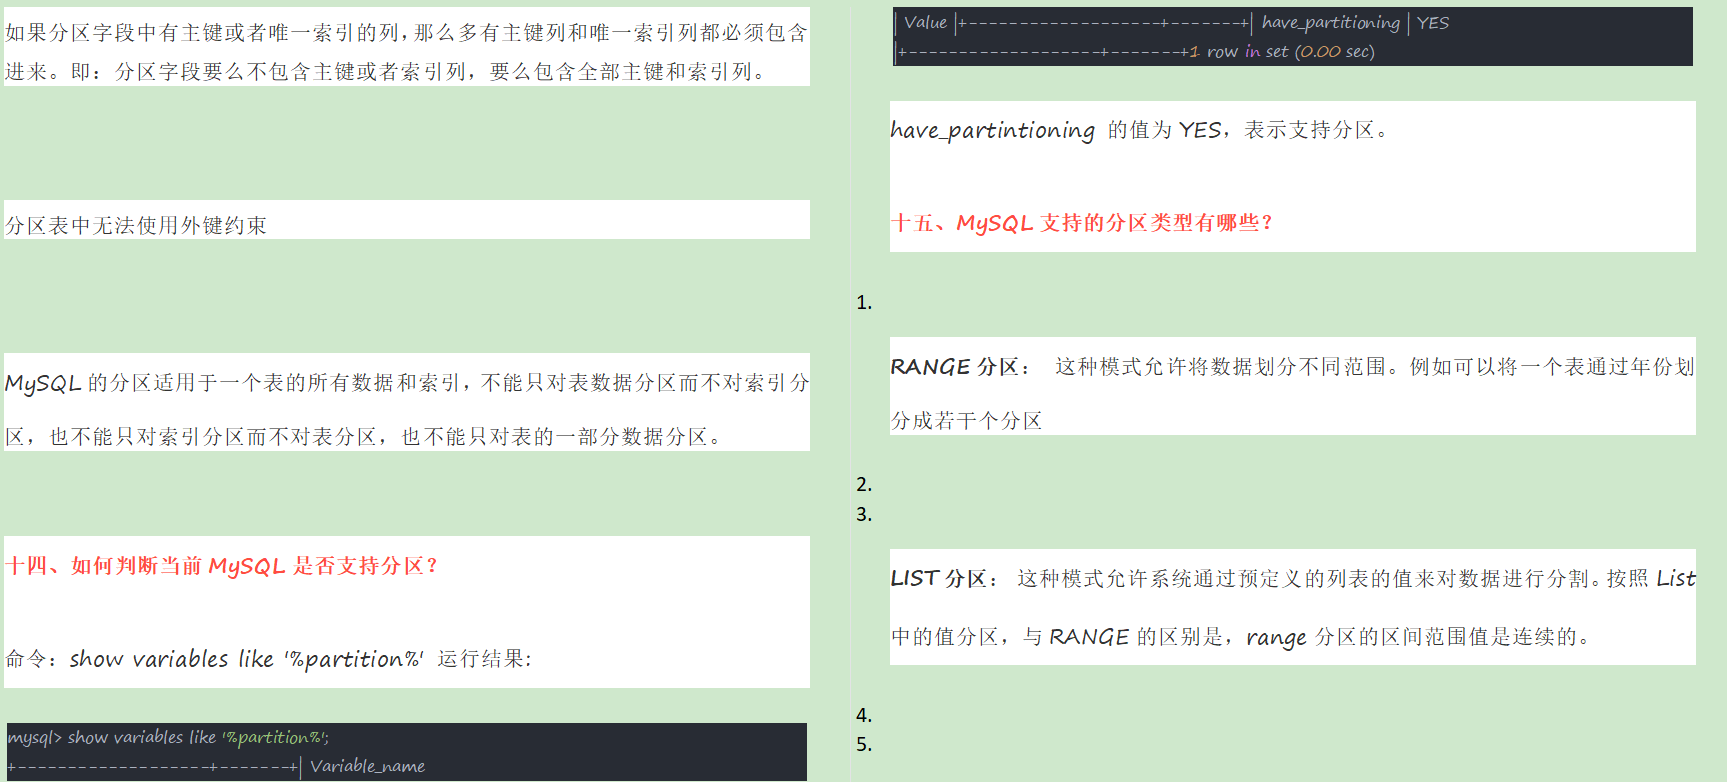 In three steps, MySQL was completed in one day, and I successfully won the Tmall offer